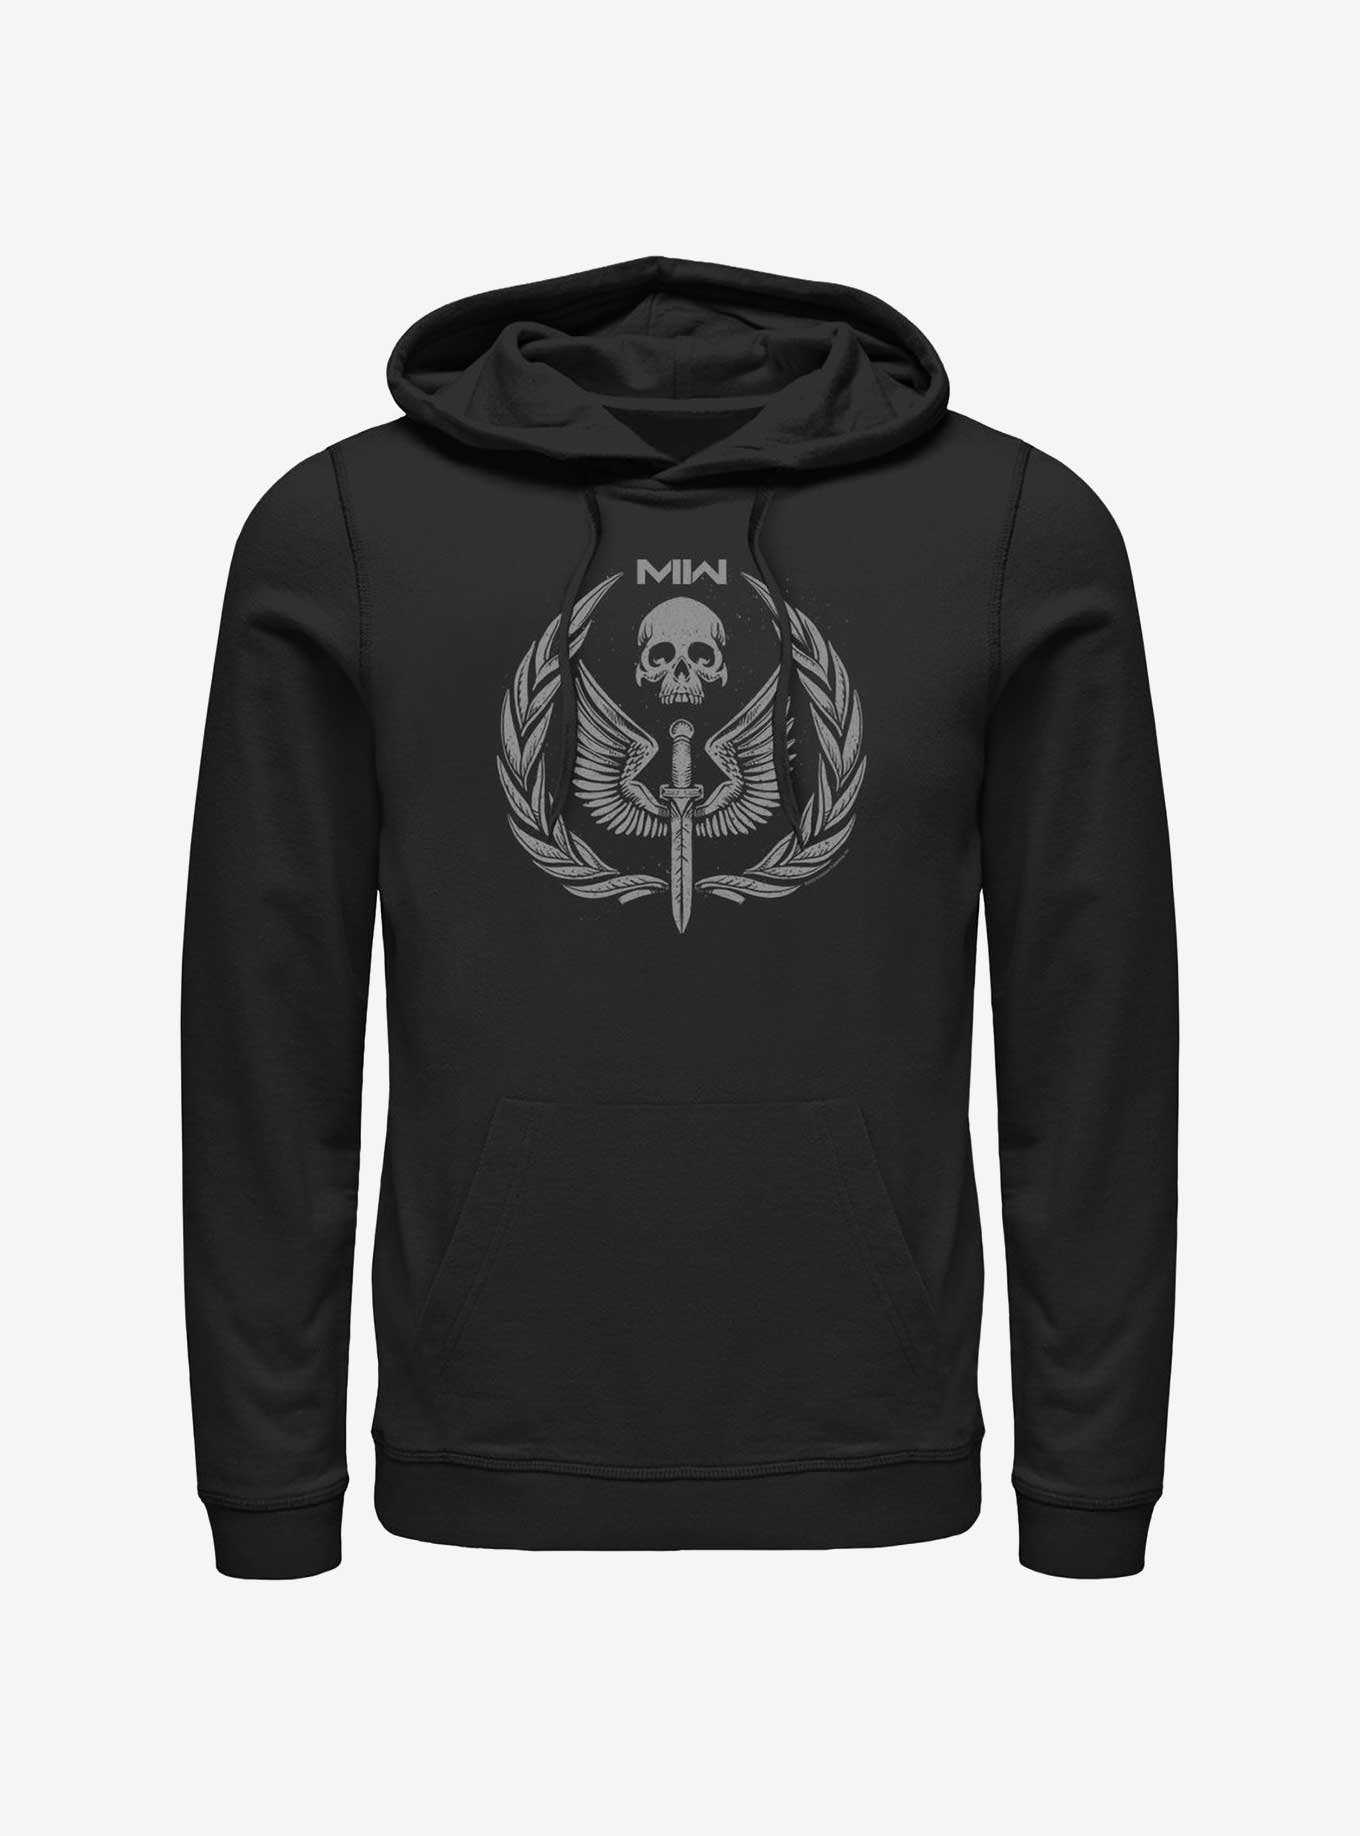 Call of Duty Skull And Dagger Hoodie, , hi-res